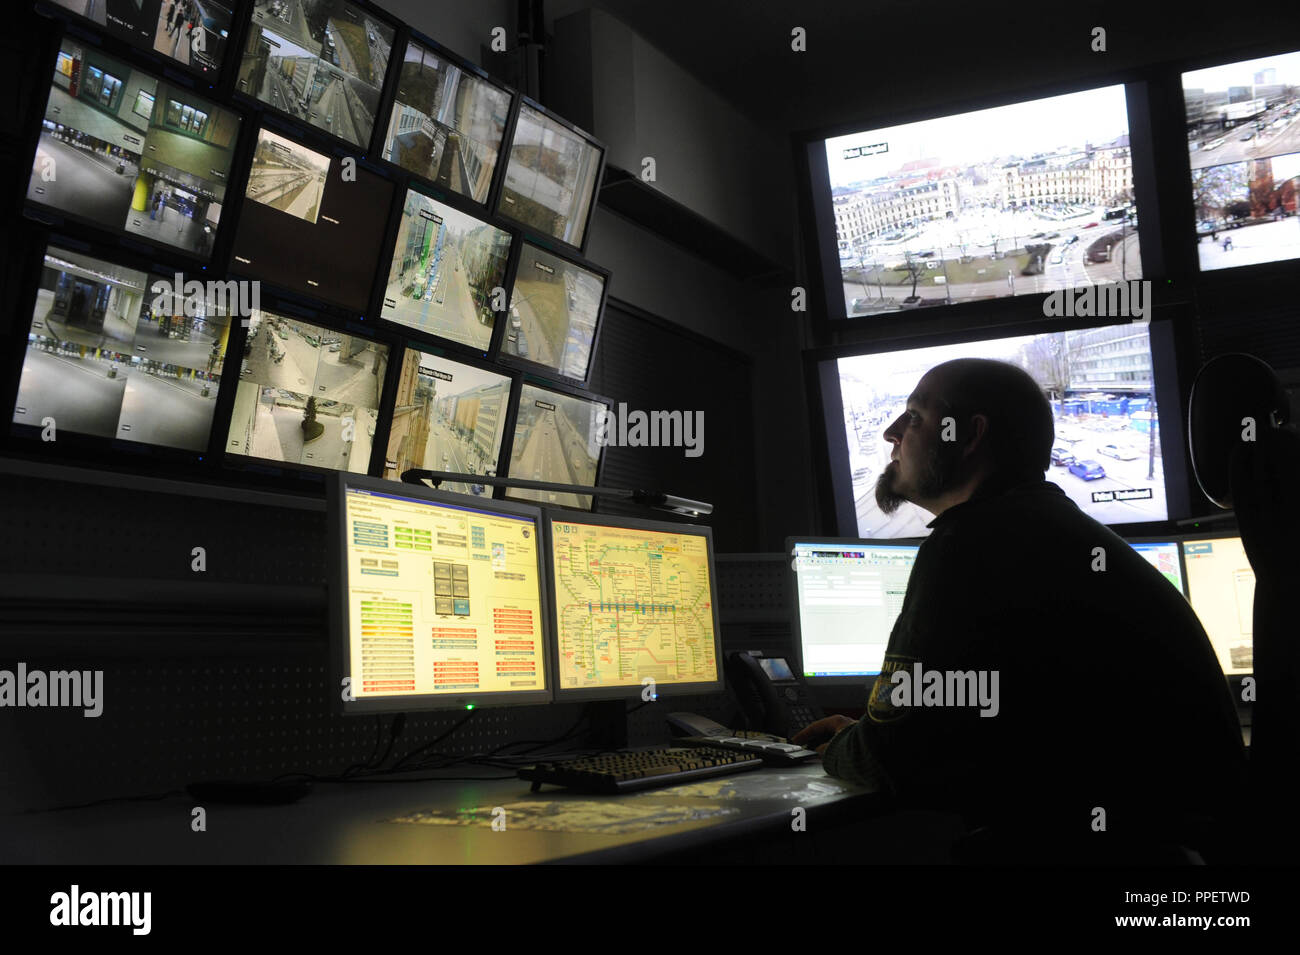 A police officer monitors the happenings at train stations and public places in the video surveillance room of the Operations Centre at the Munich Police Headquarters. Stock Photo